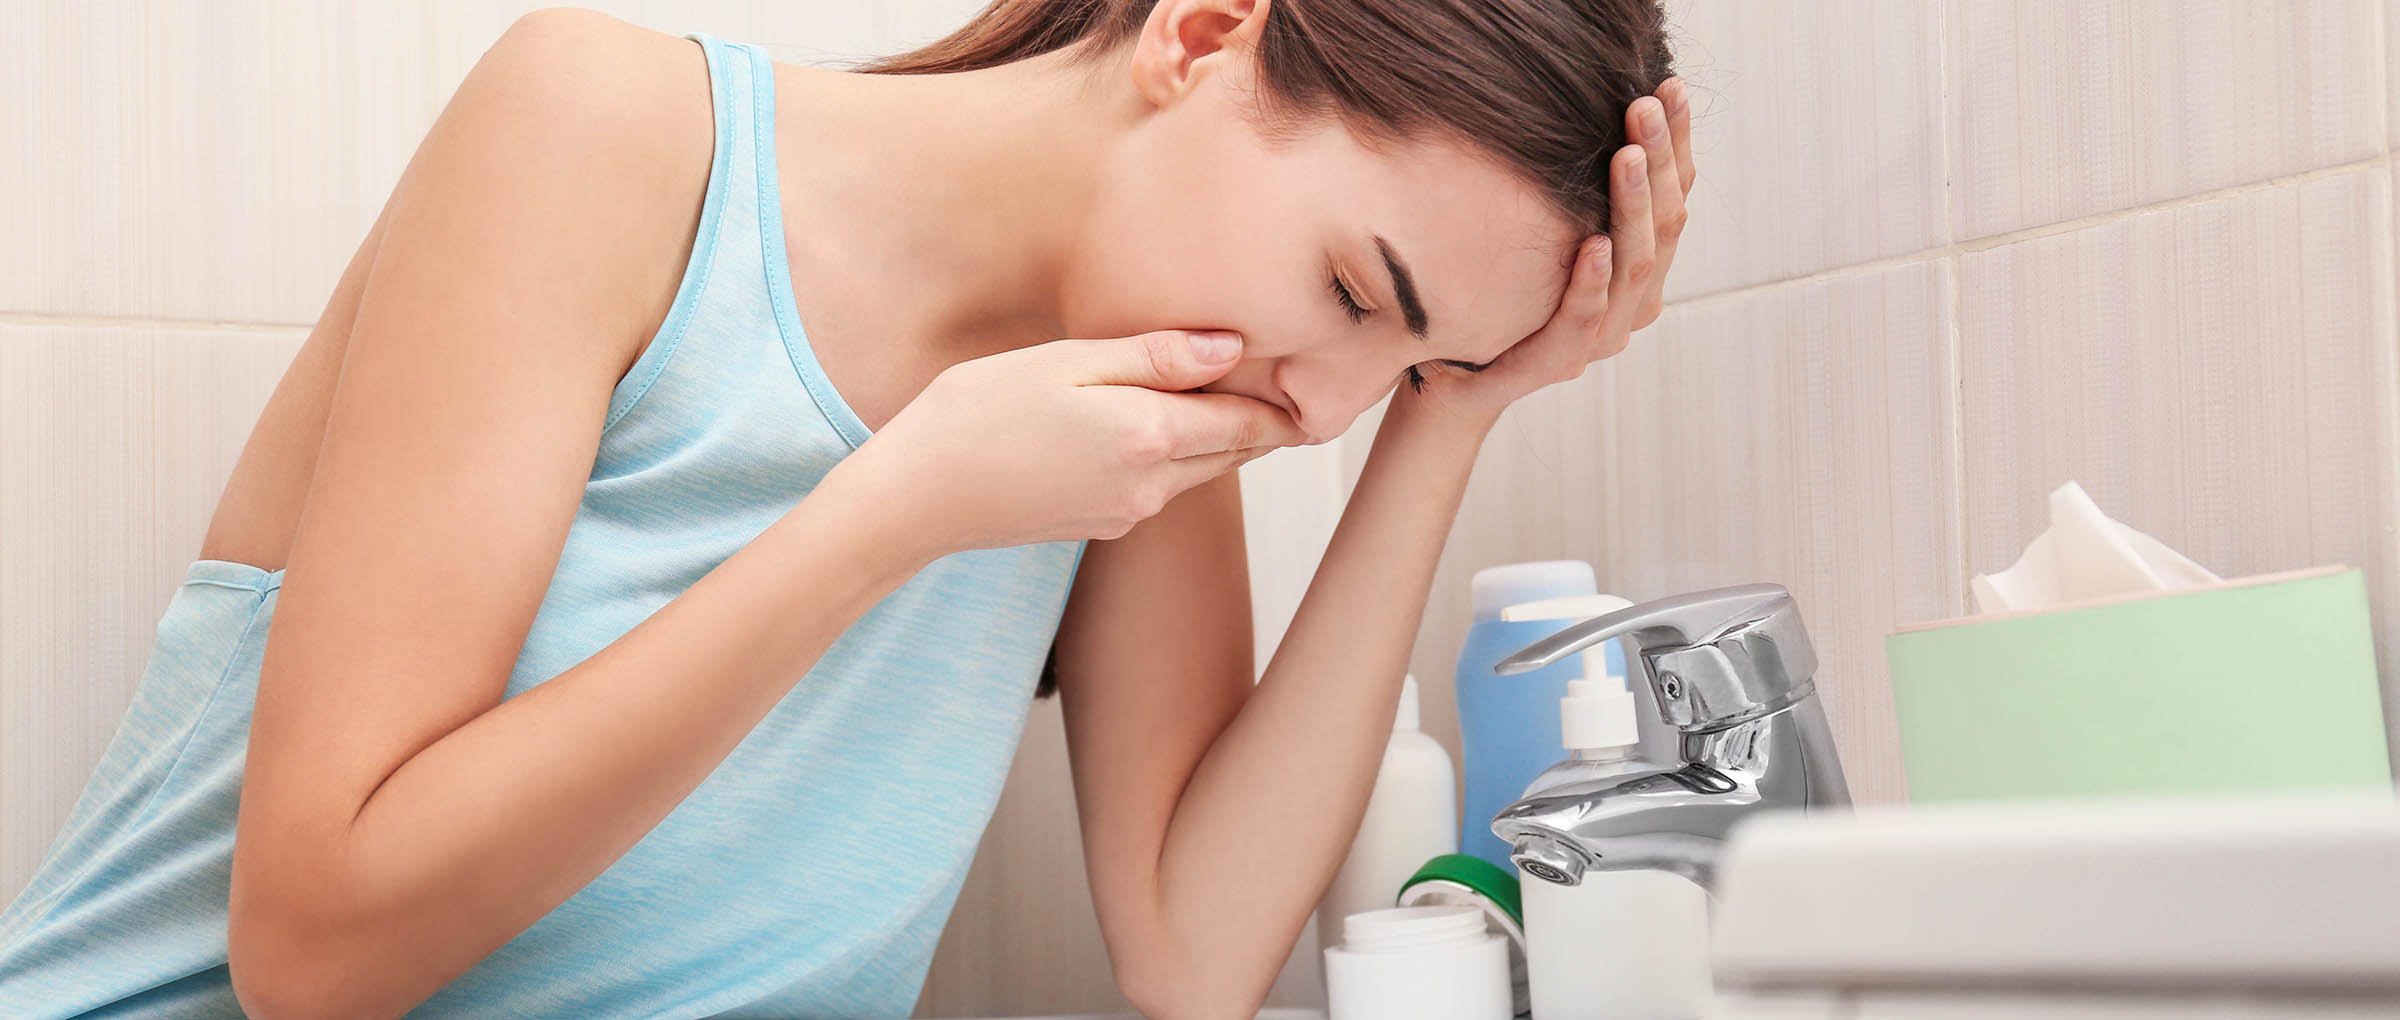 Treating Nausea And Vomiting Using CBD - Dosage And Delivery